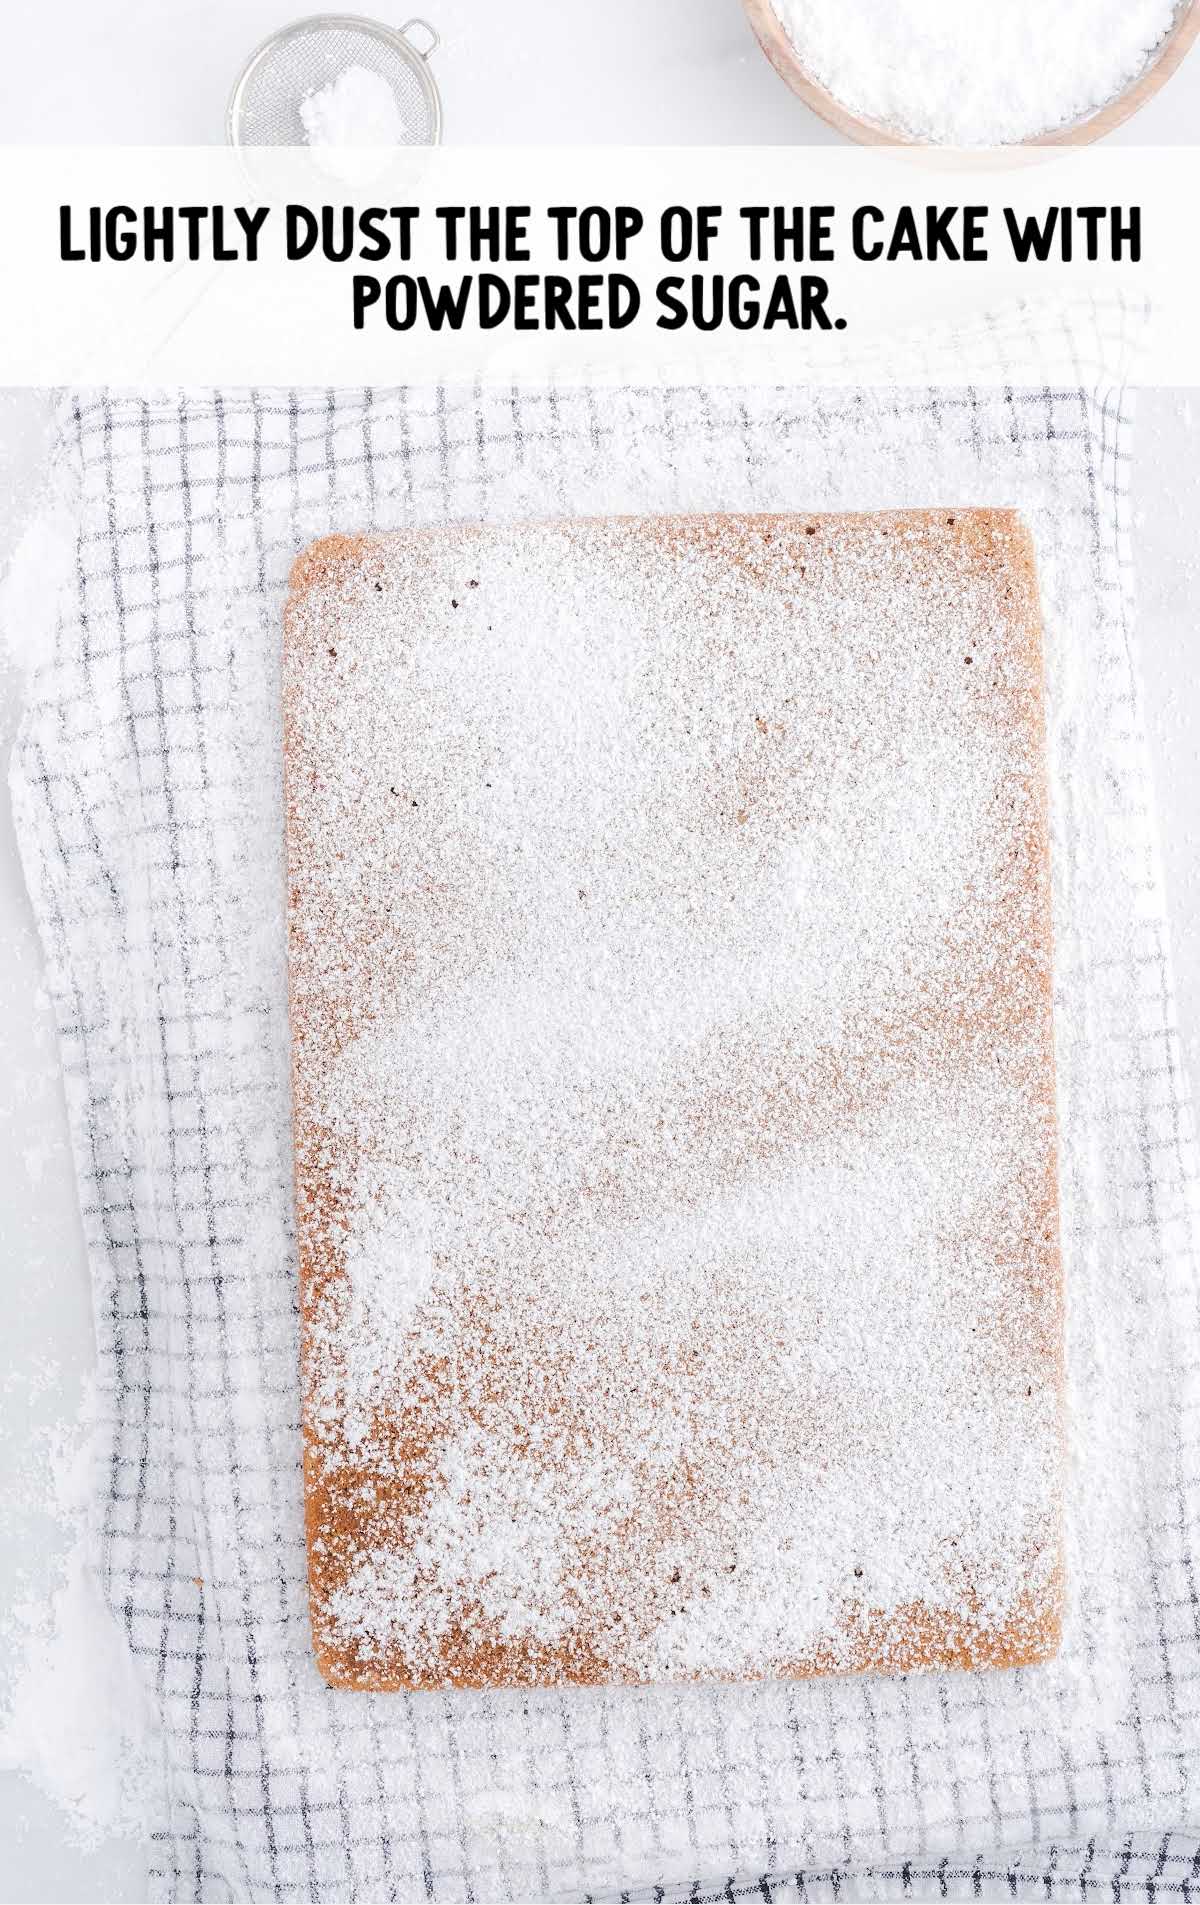 powdered sugar being dusted on the top of the cake